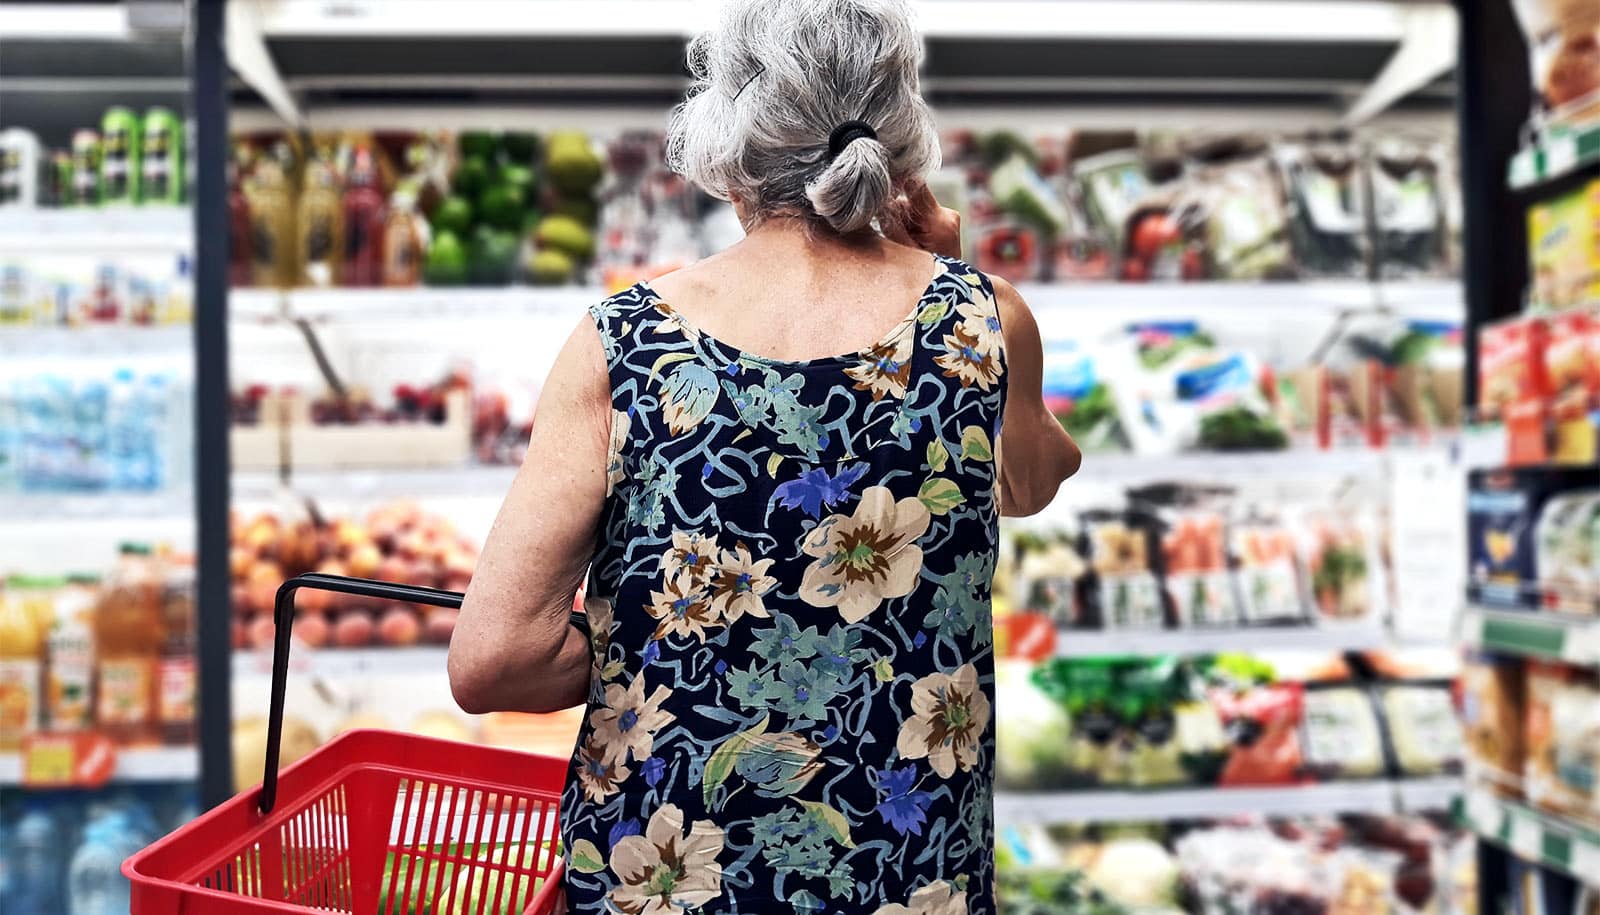 An older woman at the grocery looking at full shelves.